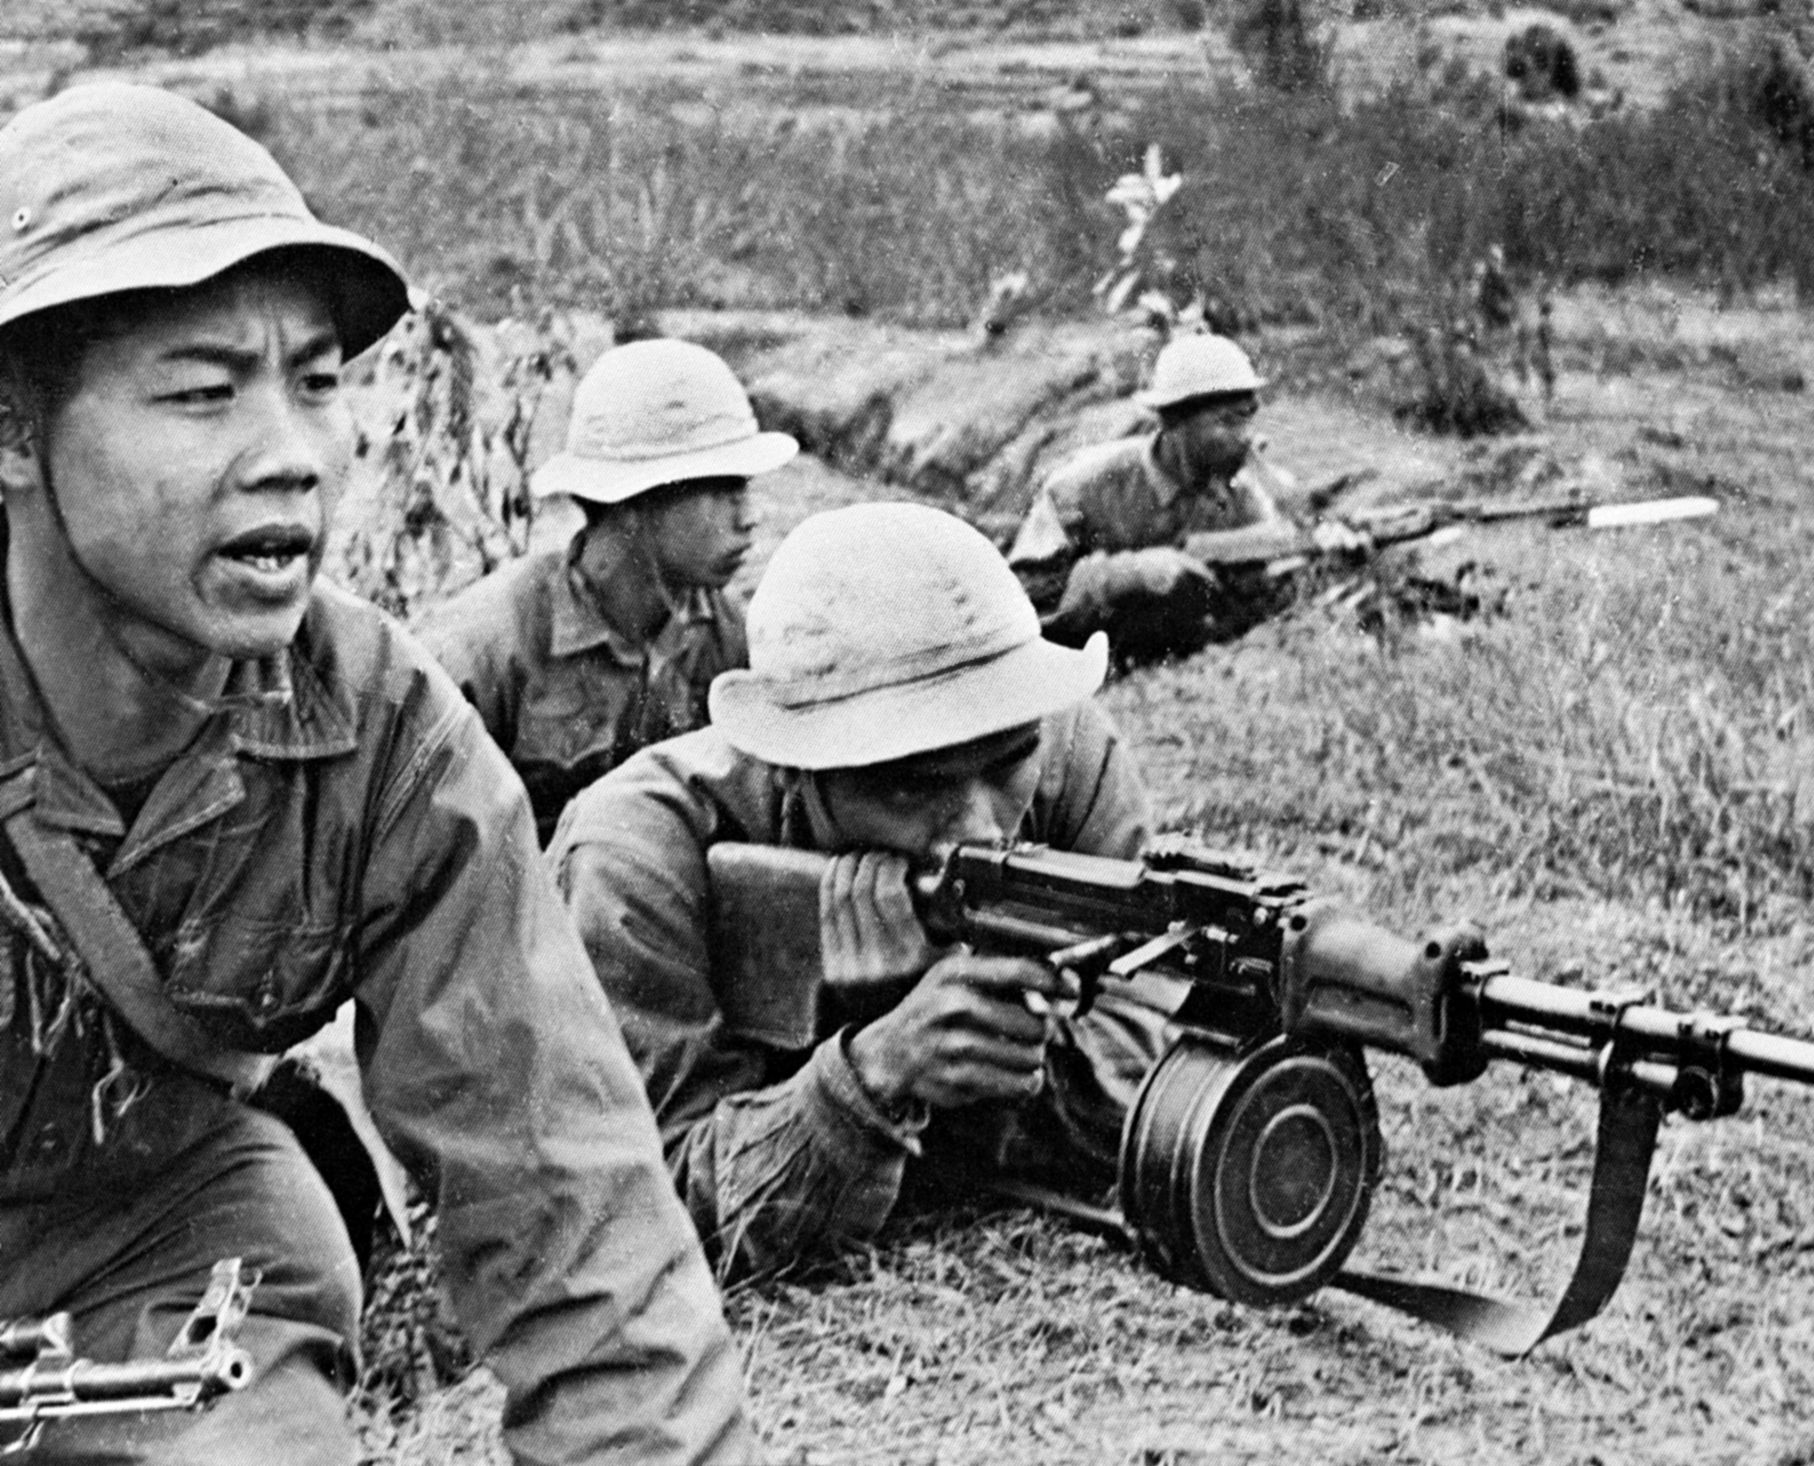 Well-trained North Vietnamese forces preferred to launch assaults on U.S. Marine positions at night. 